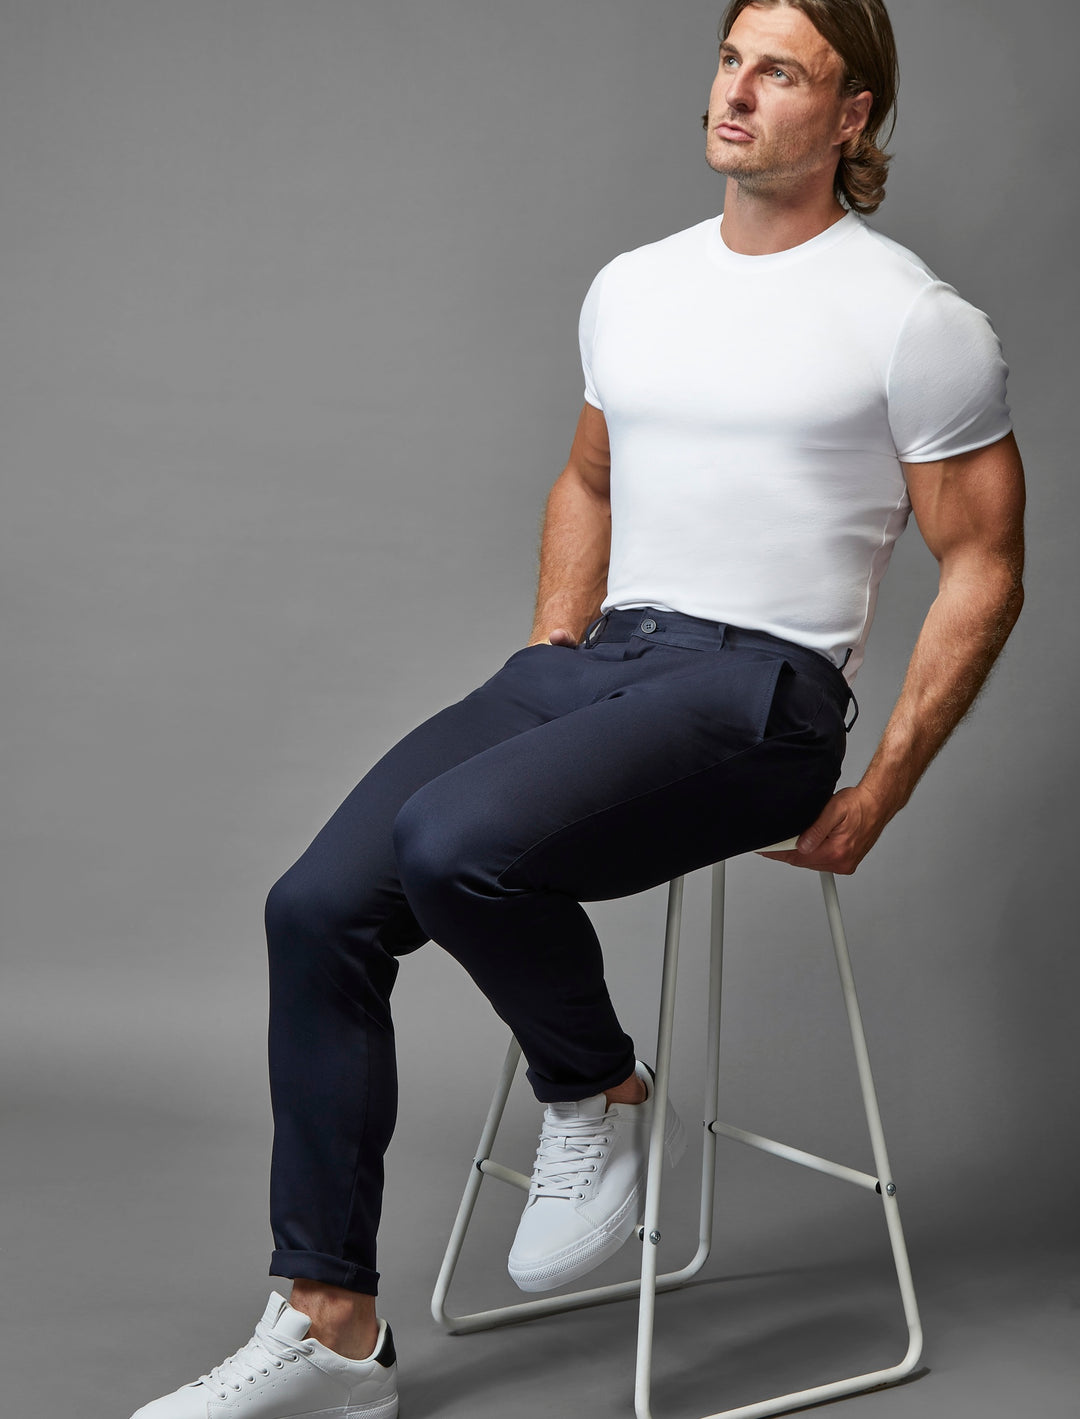 Stretch-enhanced navy chinos by Tapered Menswear, epitomizing the athletic fit trend.